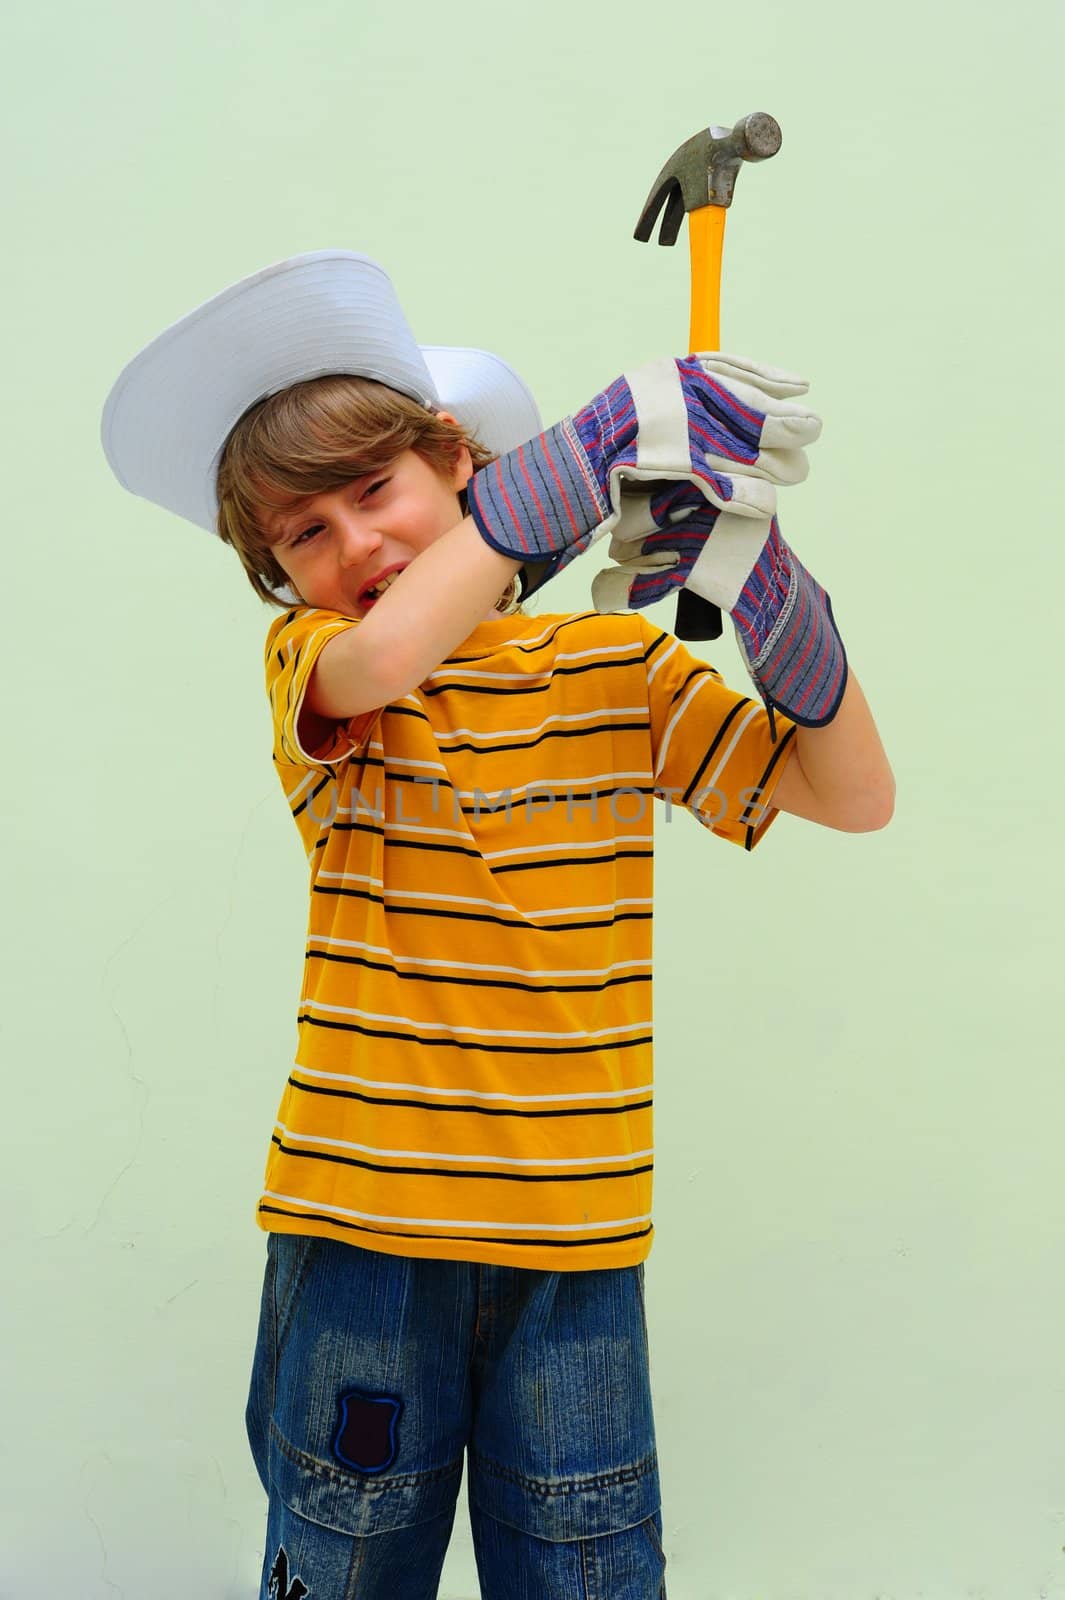 Teen Holding Steel Hammer With Wooden Handle